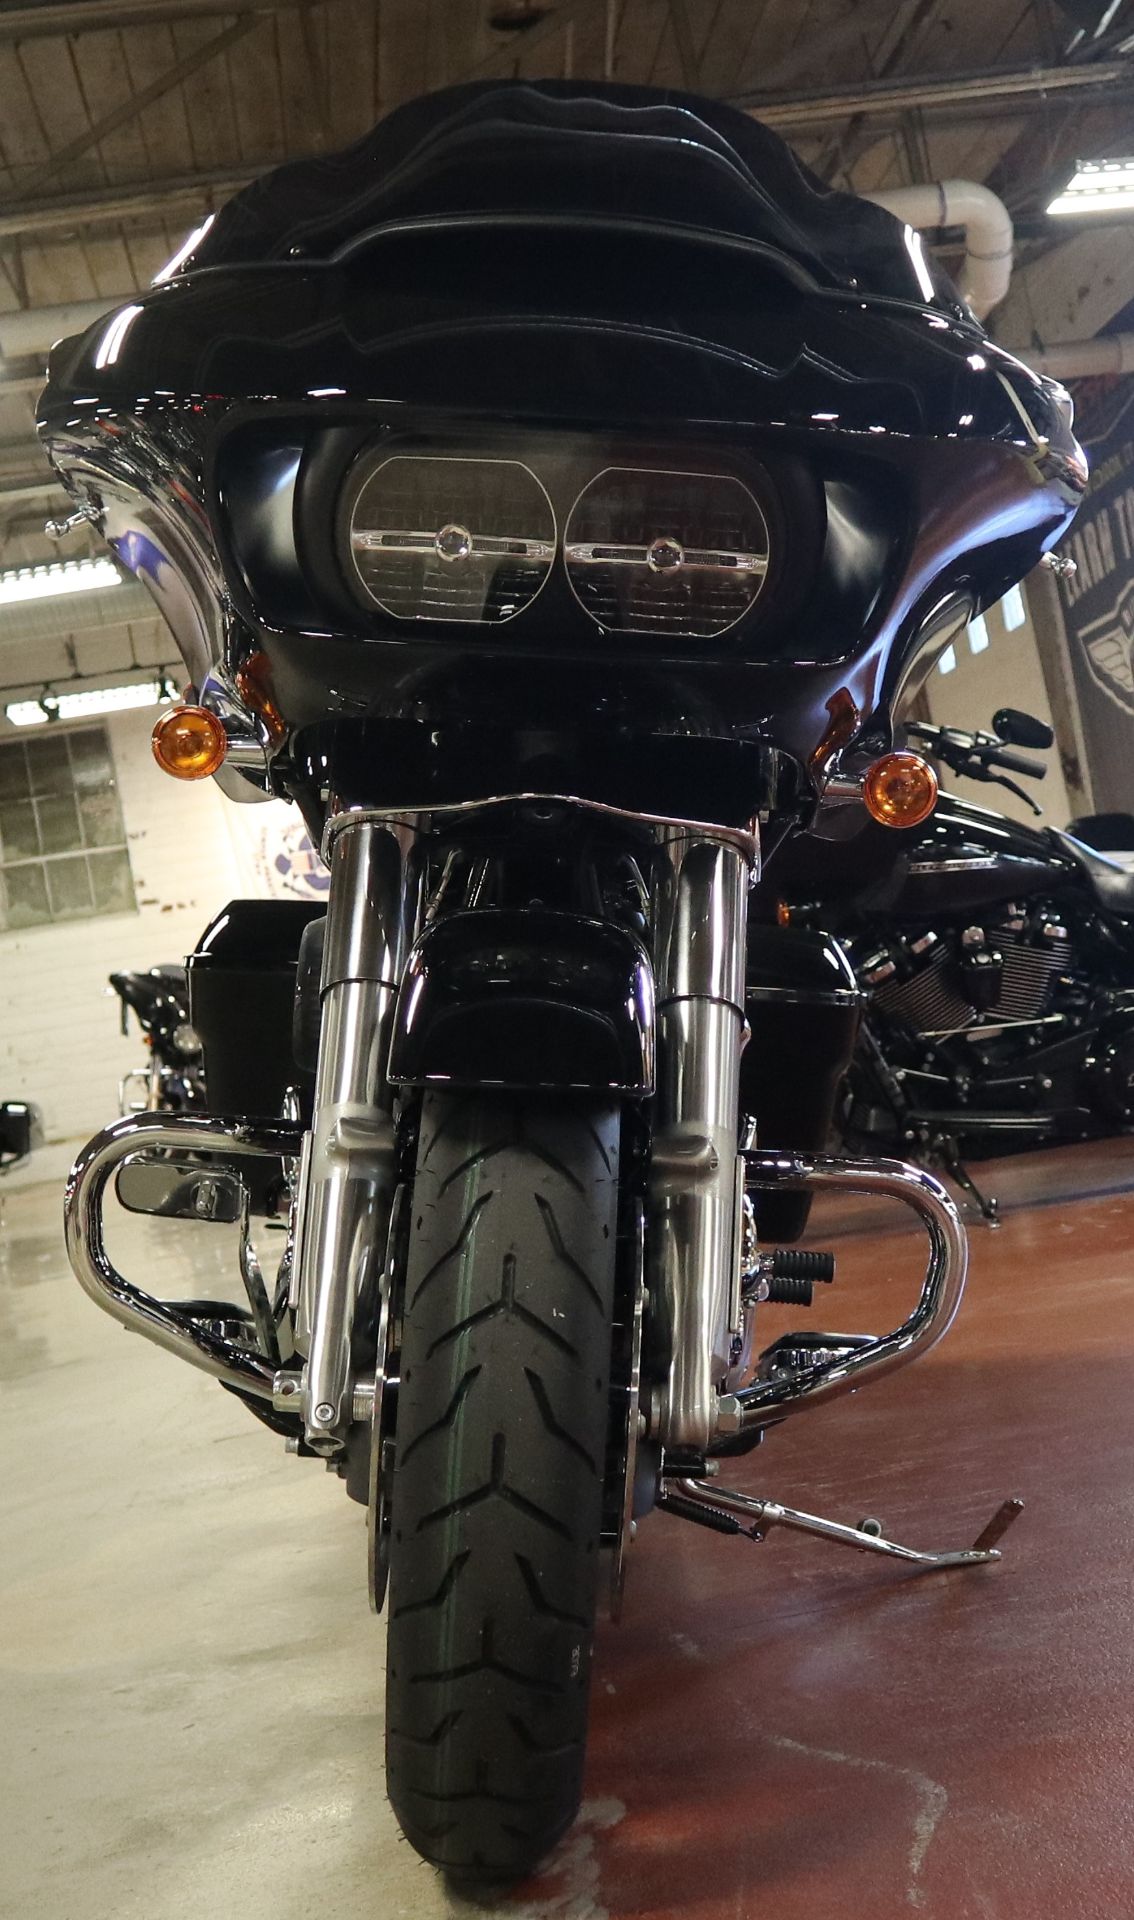 2022 Harley-Davidson Road Glide® Special in New London, Connecticut - Photo 3